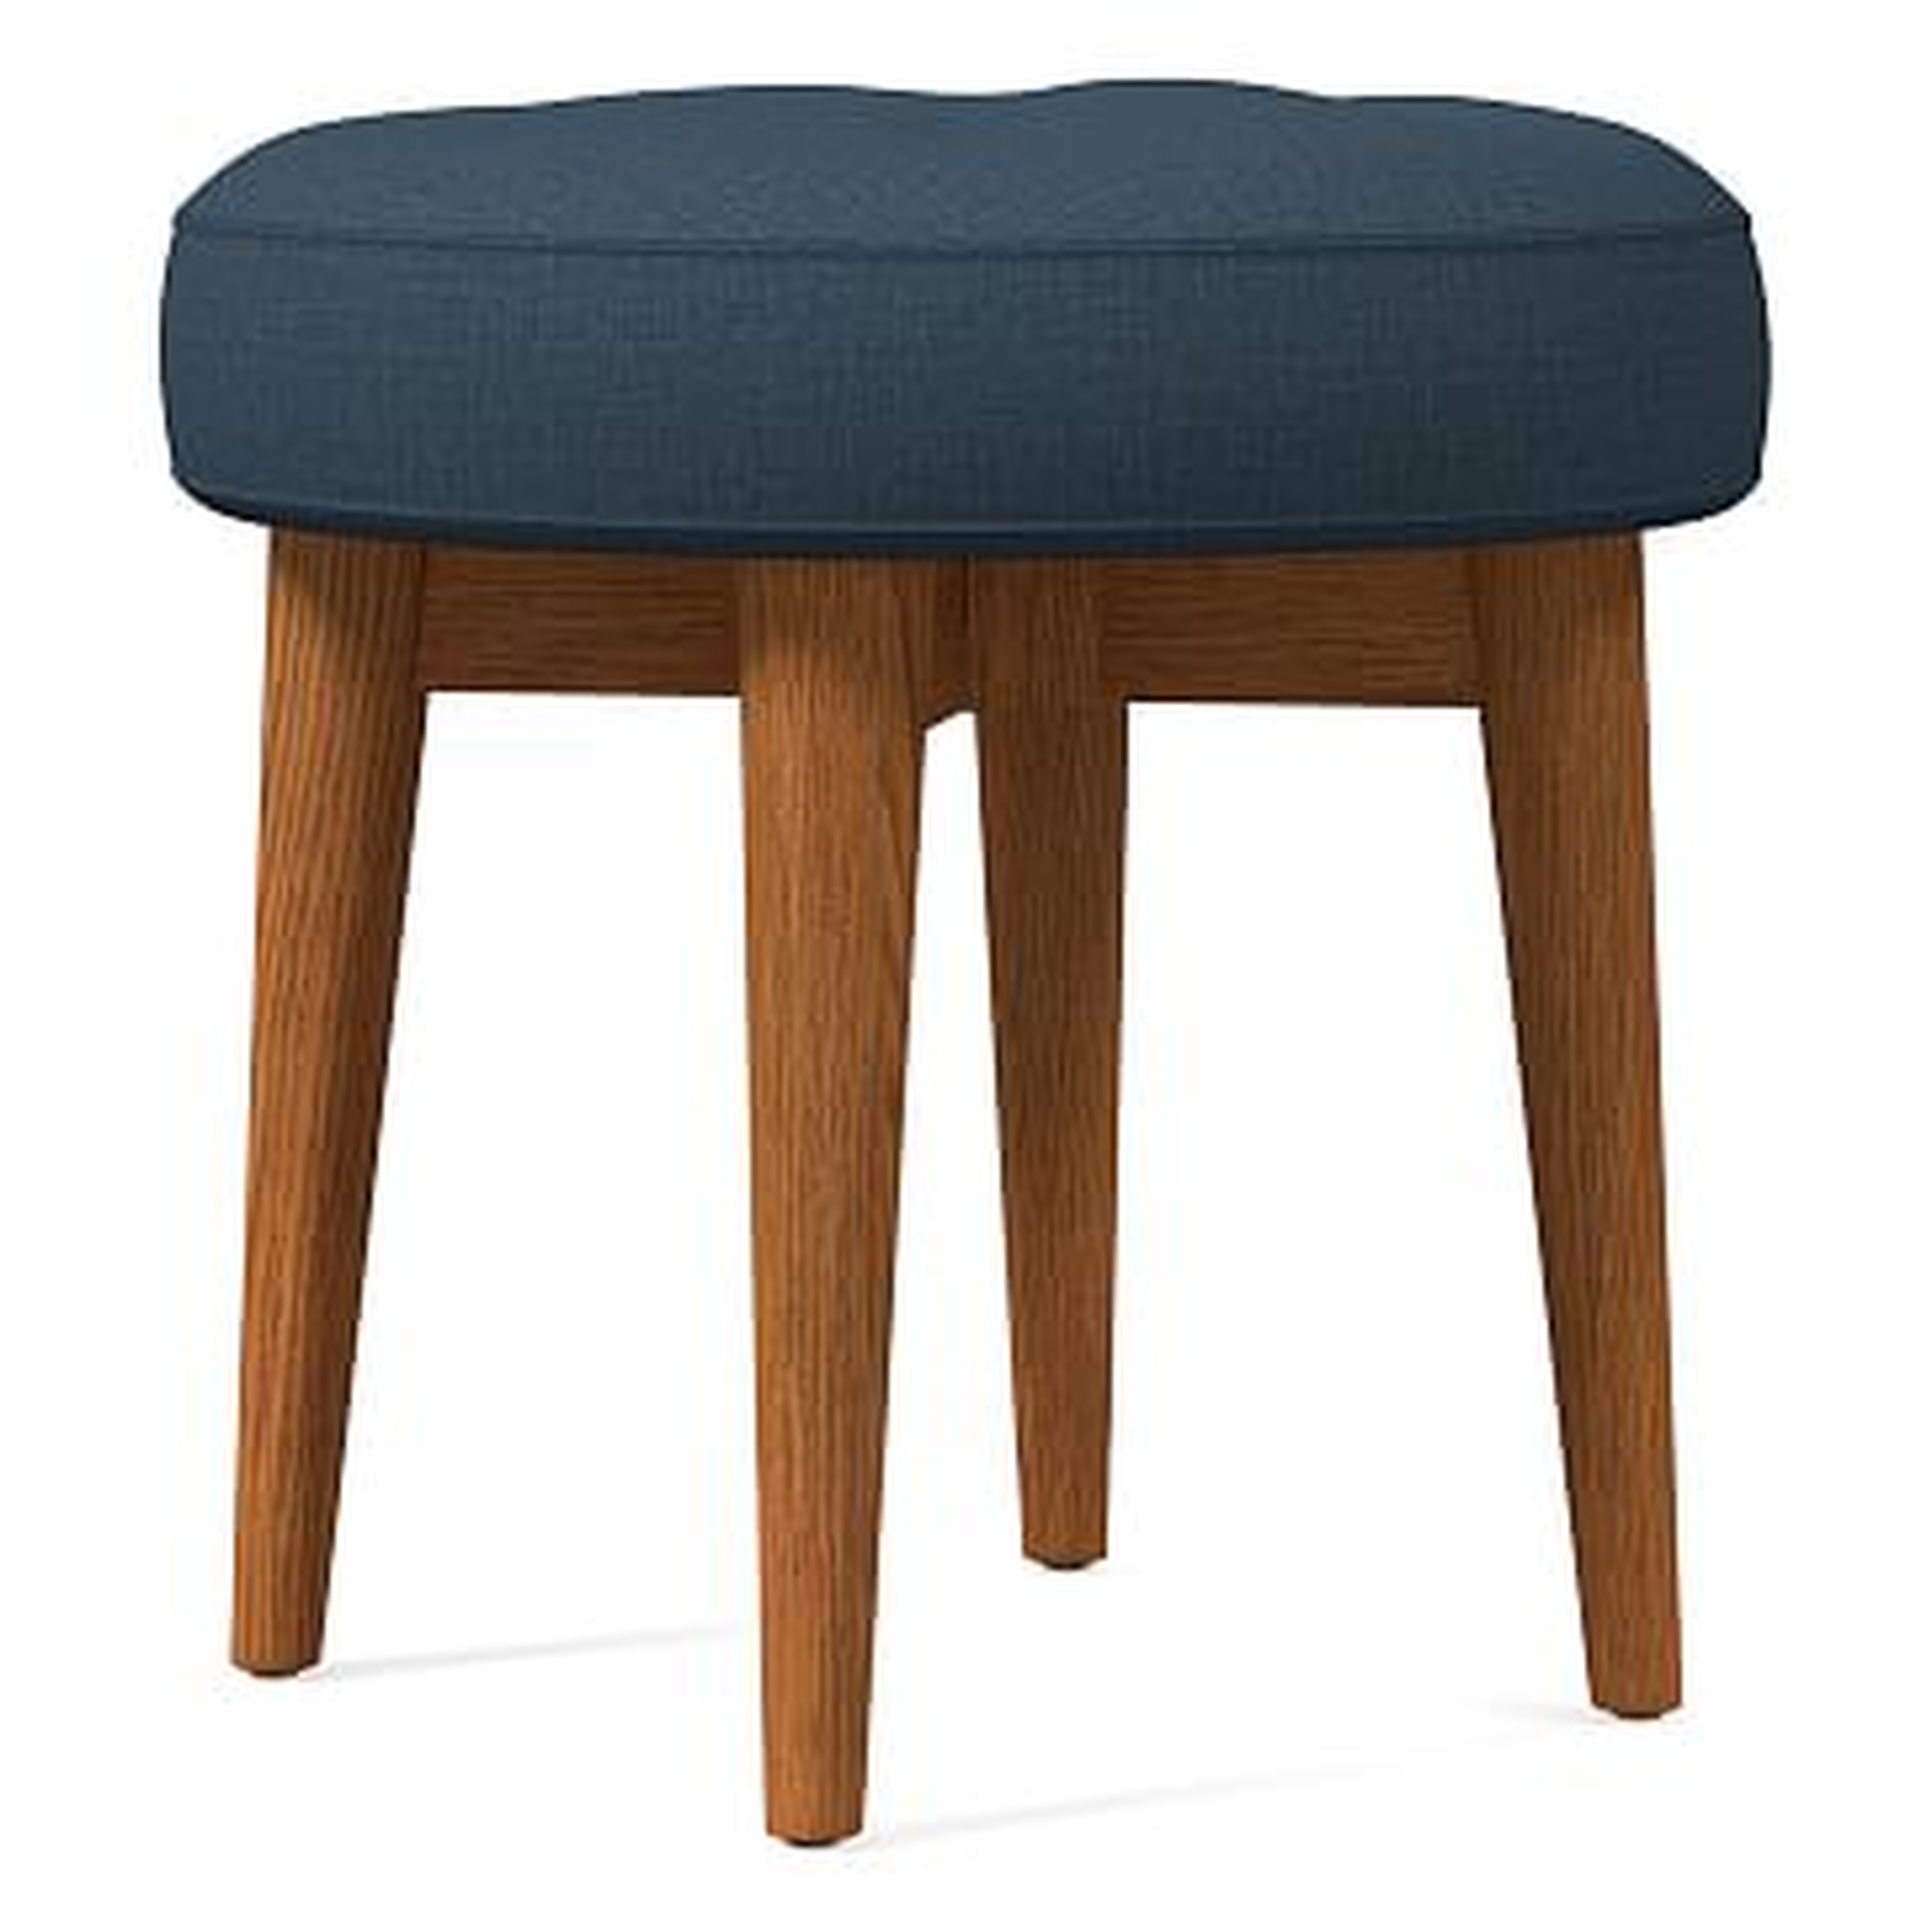 Mid-Century Upholstered Stool, Poly, Yarn Dyed Linen Weave, Regal Blue, Pecan - West Elm